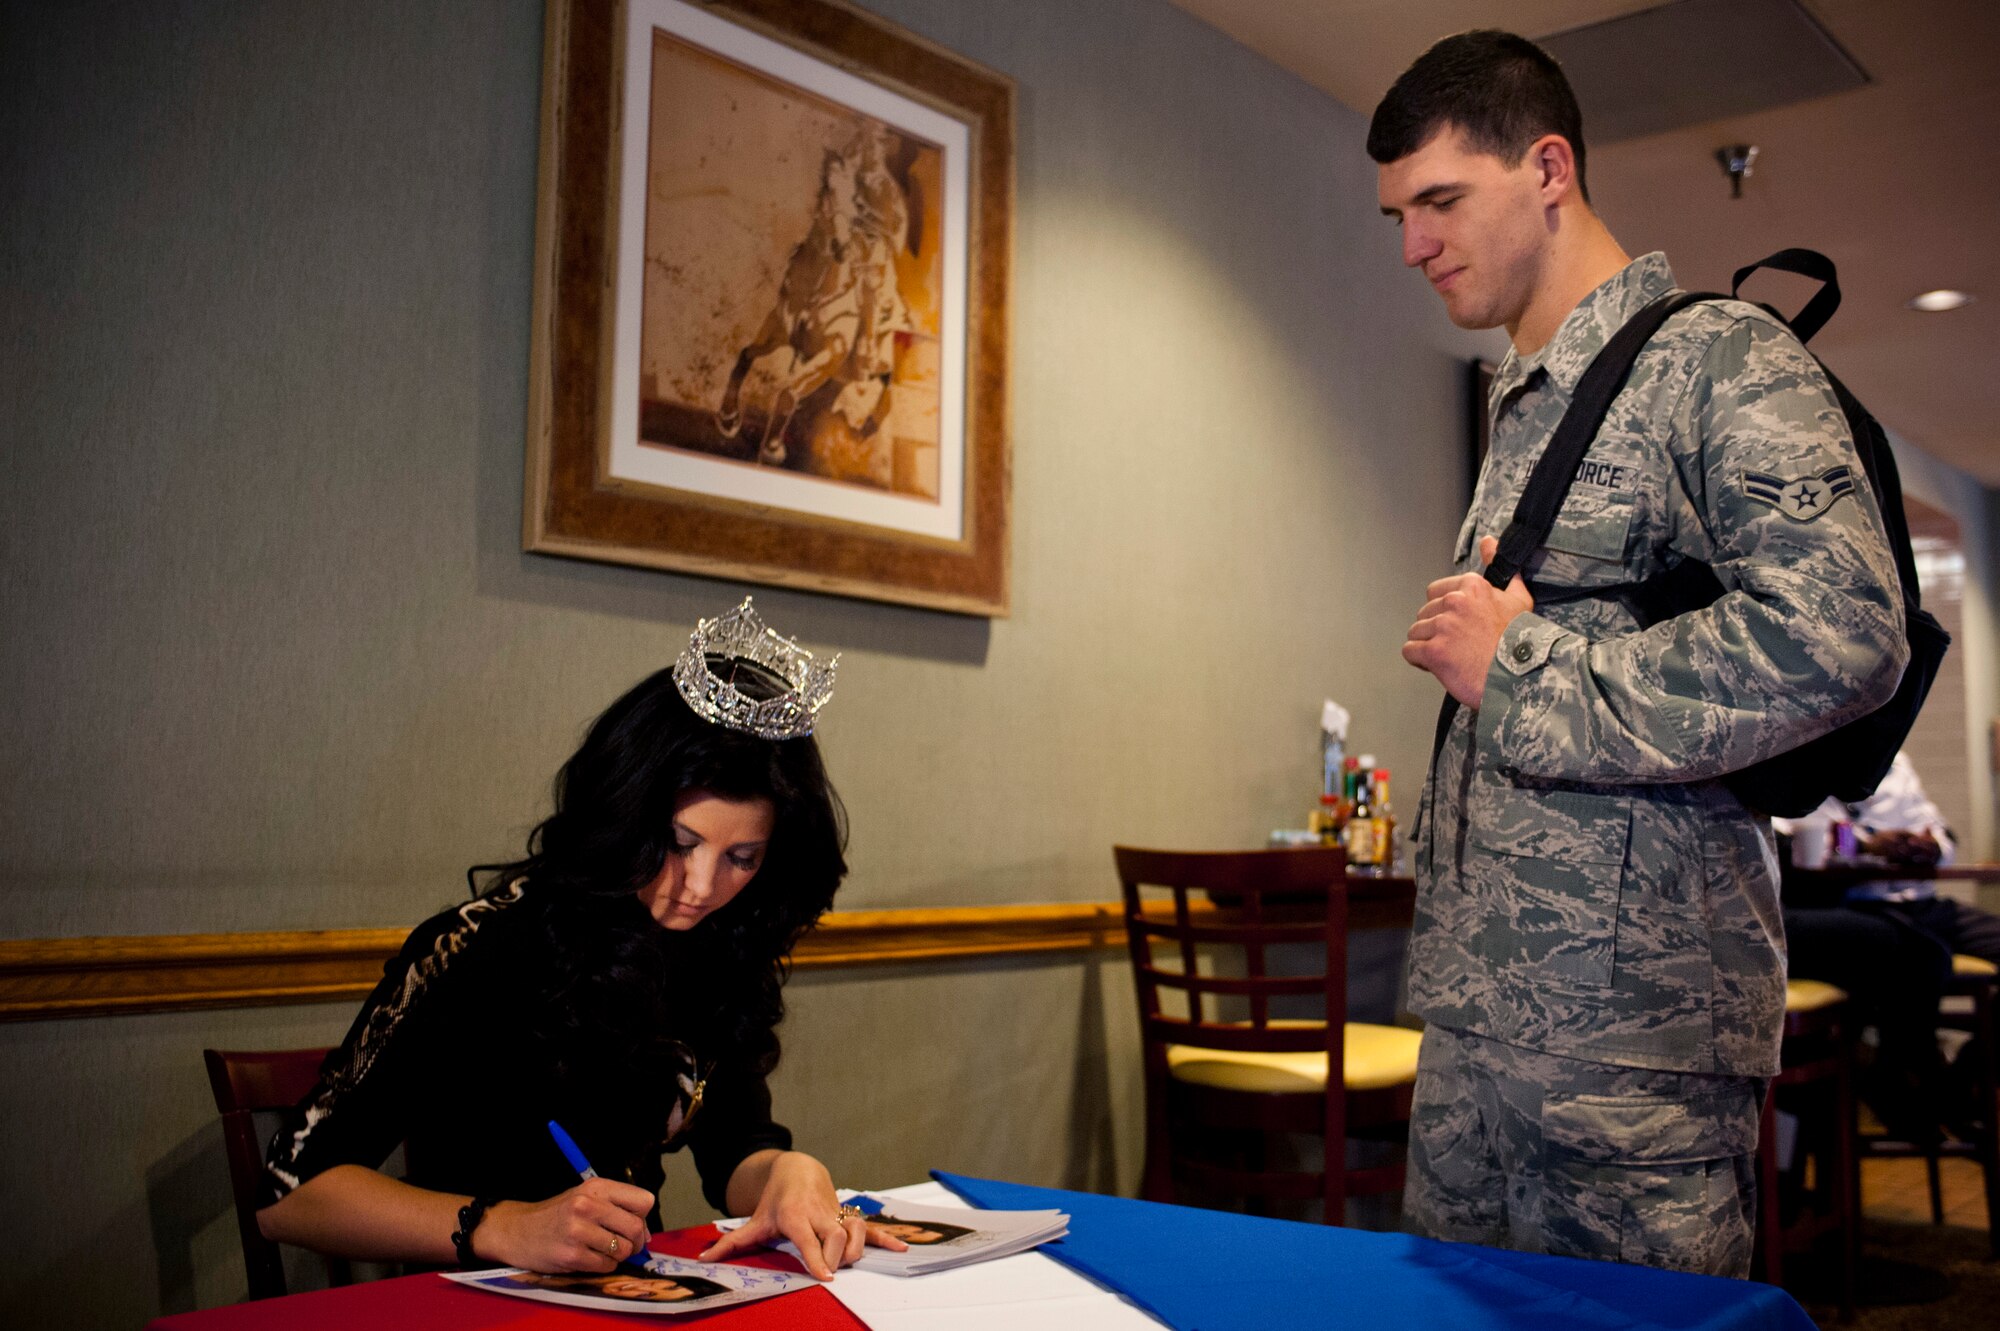 Lauren Kaeppeler, Miss America 2012, signs autographs for Nellis Airmen, Jan. 8, 2013, at Nellis Air Force Base, Nev. Kaeppeler is set to crown the next Miss America on Jan. 12 at Planet Hollywood Hotel and Casino, in Las Vegas. (U.S. Air Force Photo by Airman 1st Class Jason Couillard) 